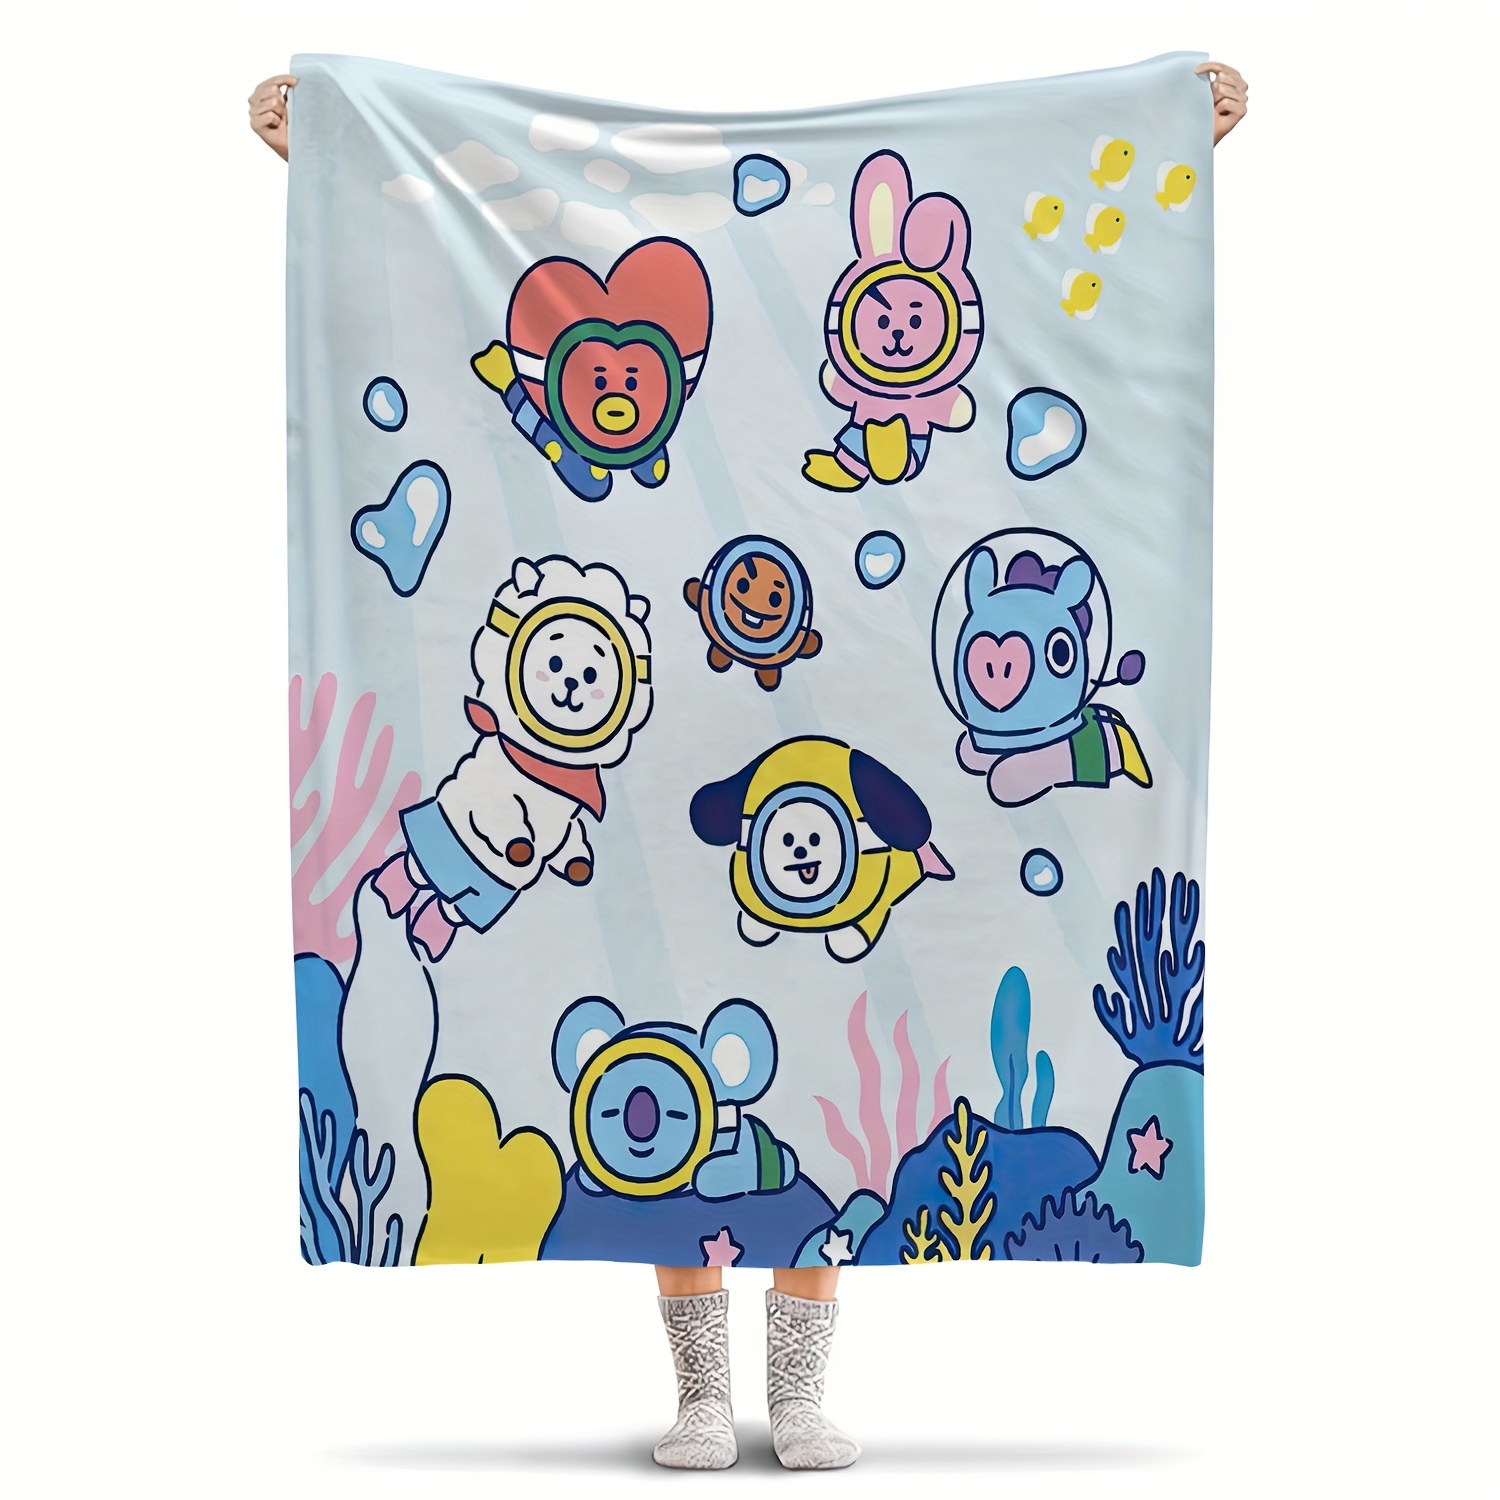 

K-pop Support Flannel Blanket - Charming Style, Machine Washable, All-season Reversible Throw For Bedding & Sofa, Digital Print Polyester Fabric, 250-300g - 1pc